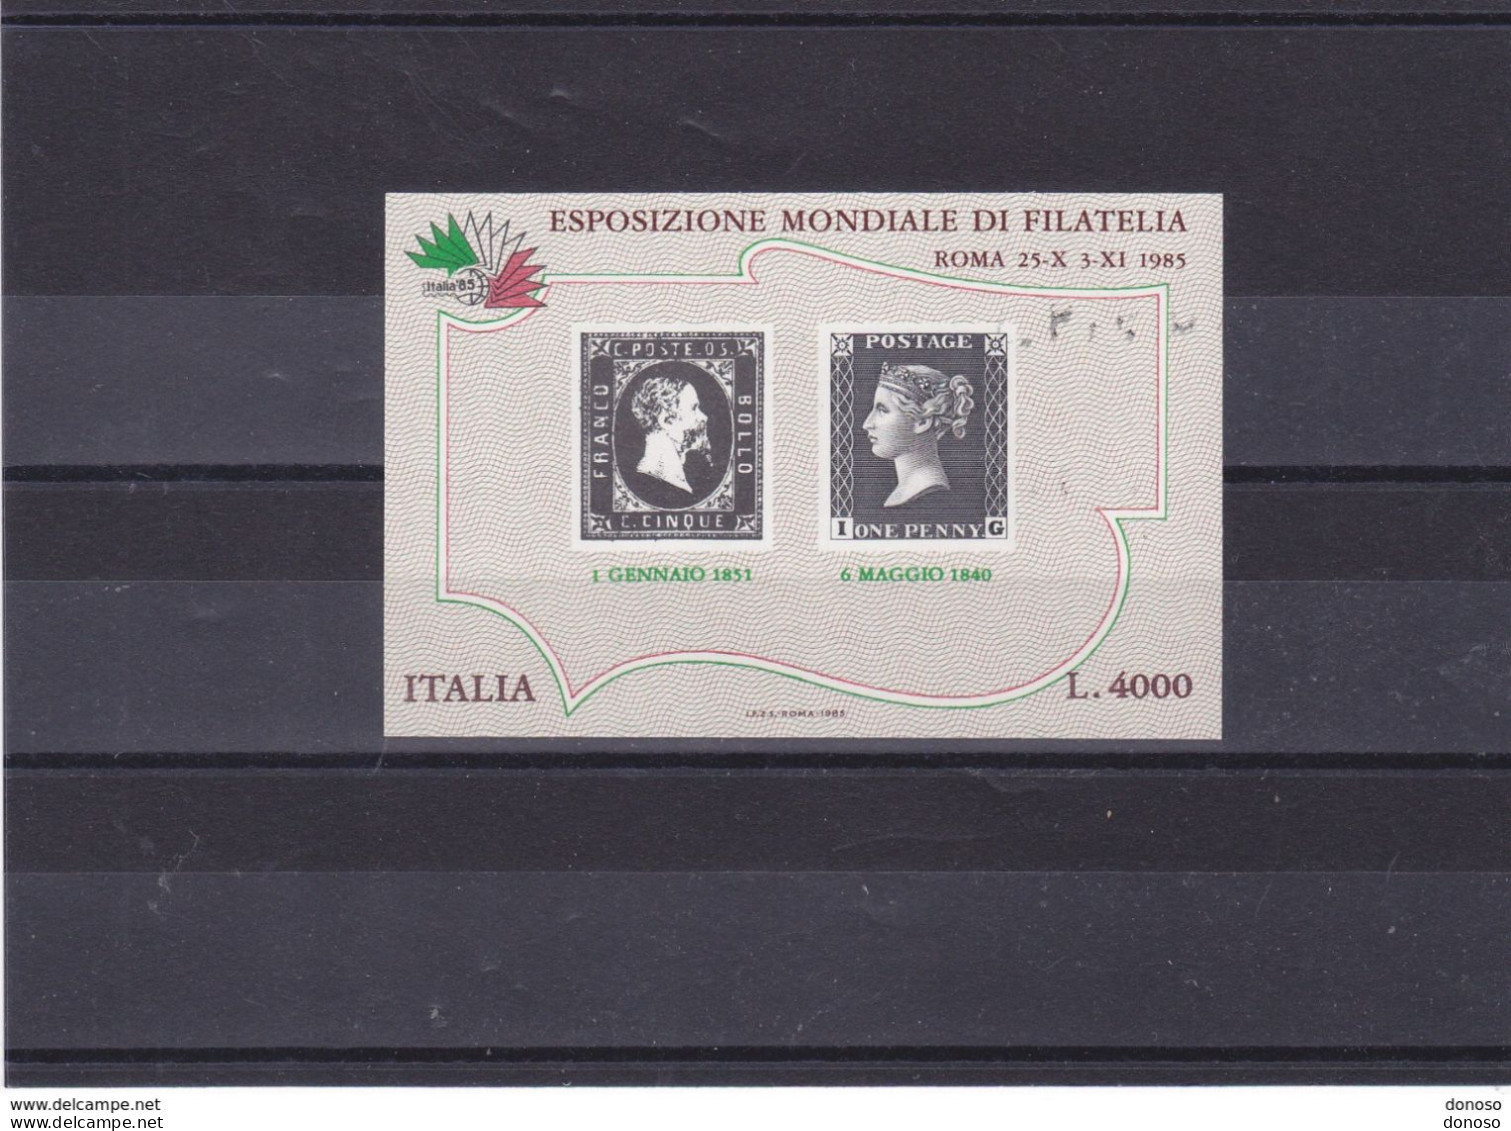 ITALIE 1985 TIMBRES SUR TIMBRES ITALIA 85 Yvert BF 3, Michel Bl 1 NEUF** MNH Cote Yv: 8 Euros - 1981-90: Ungebraucht